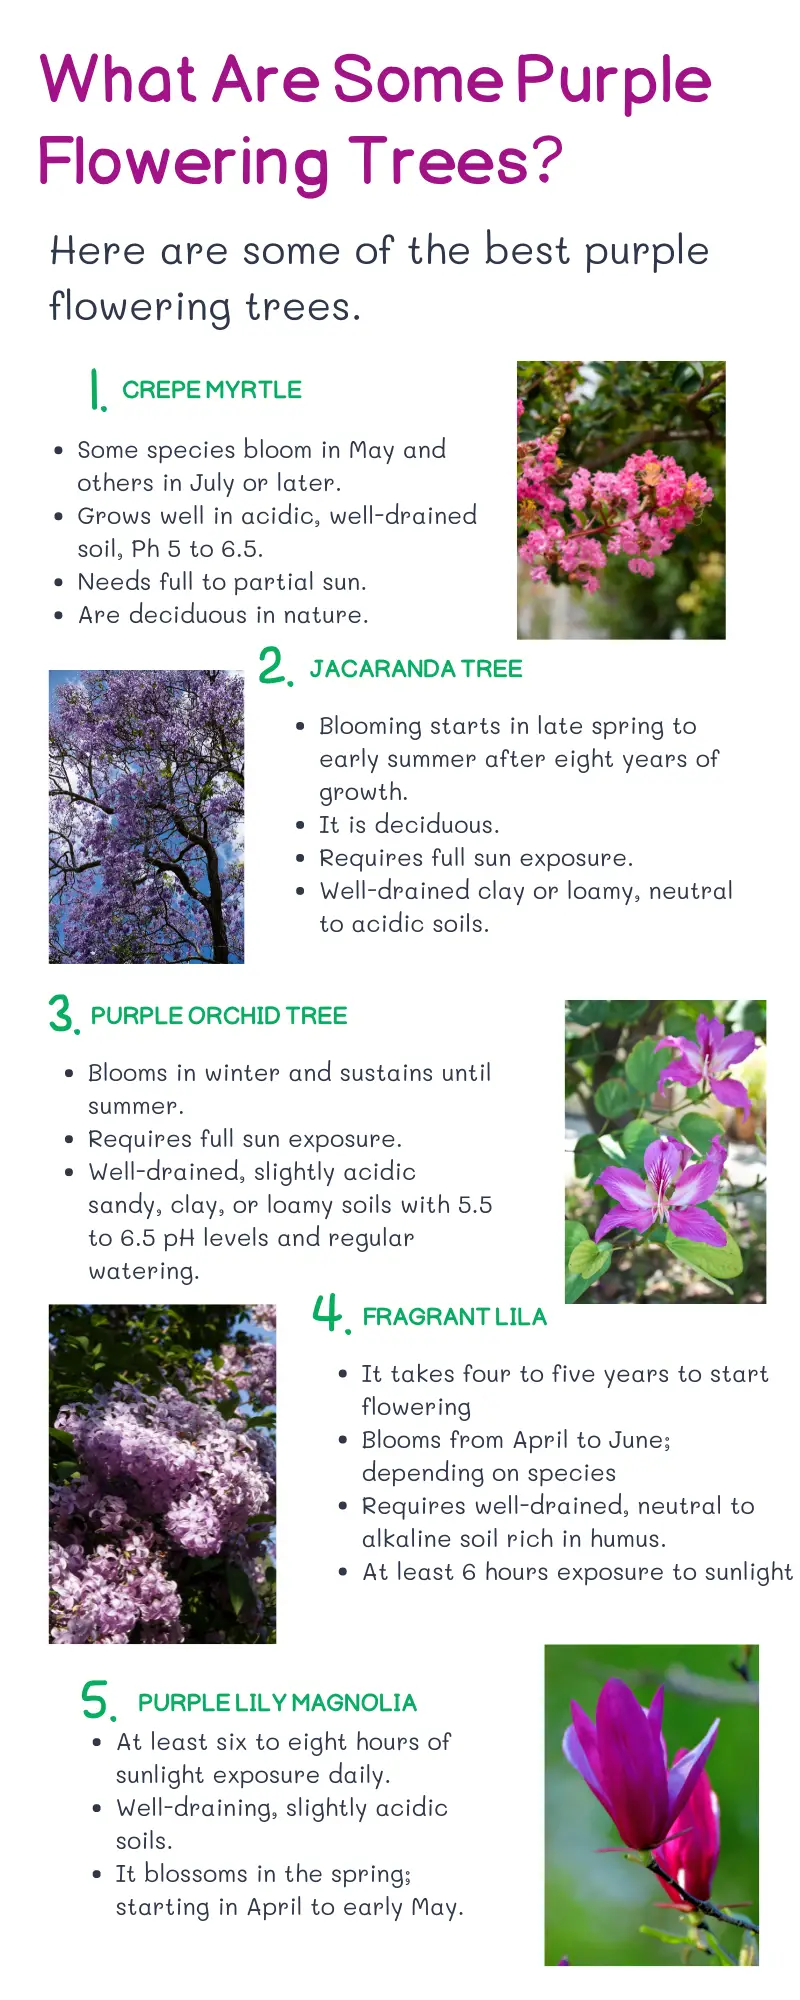 What are some purple flowering tree names?